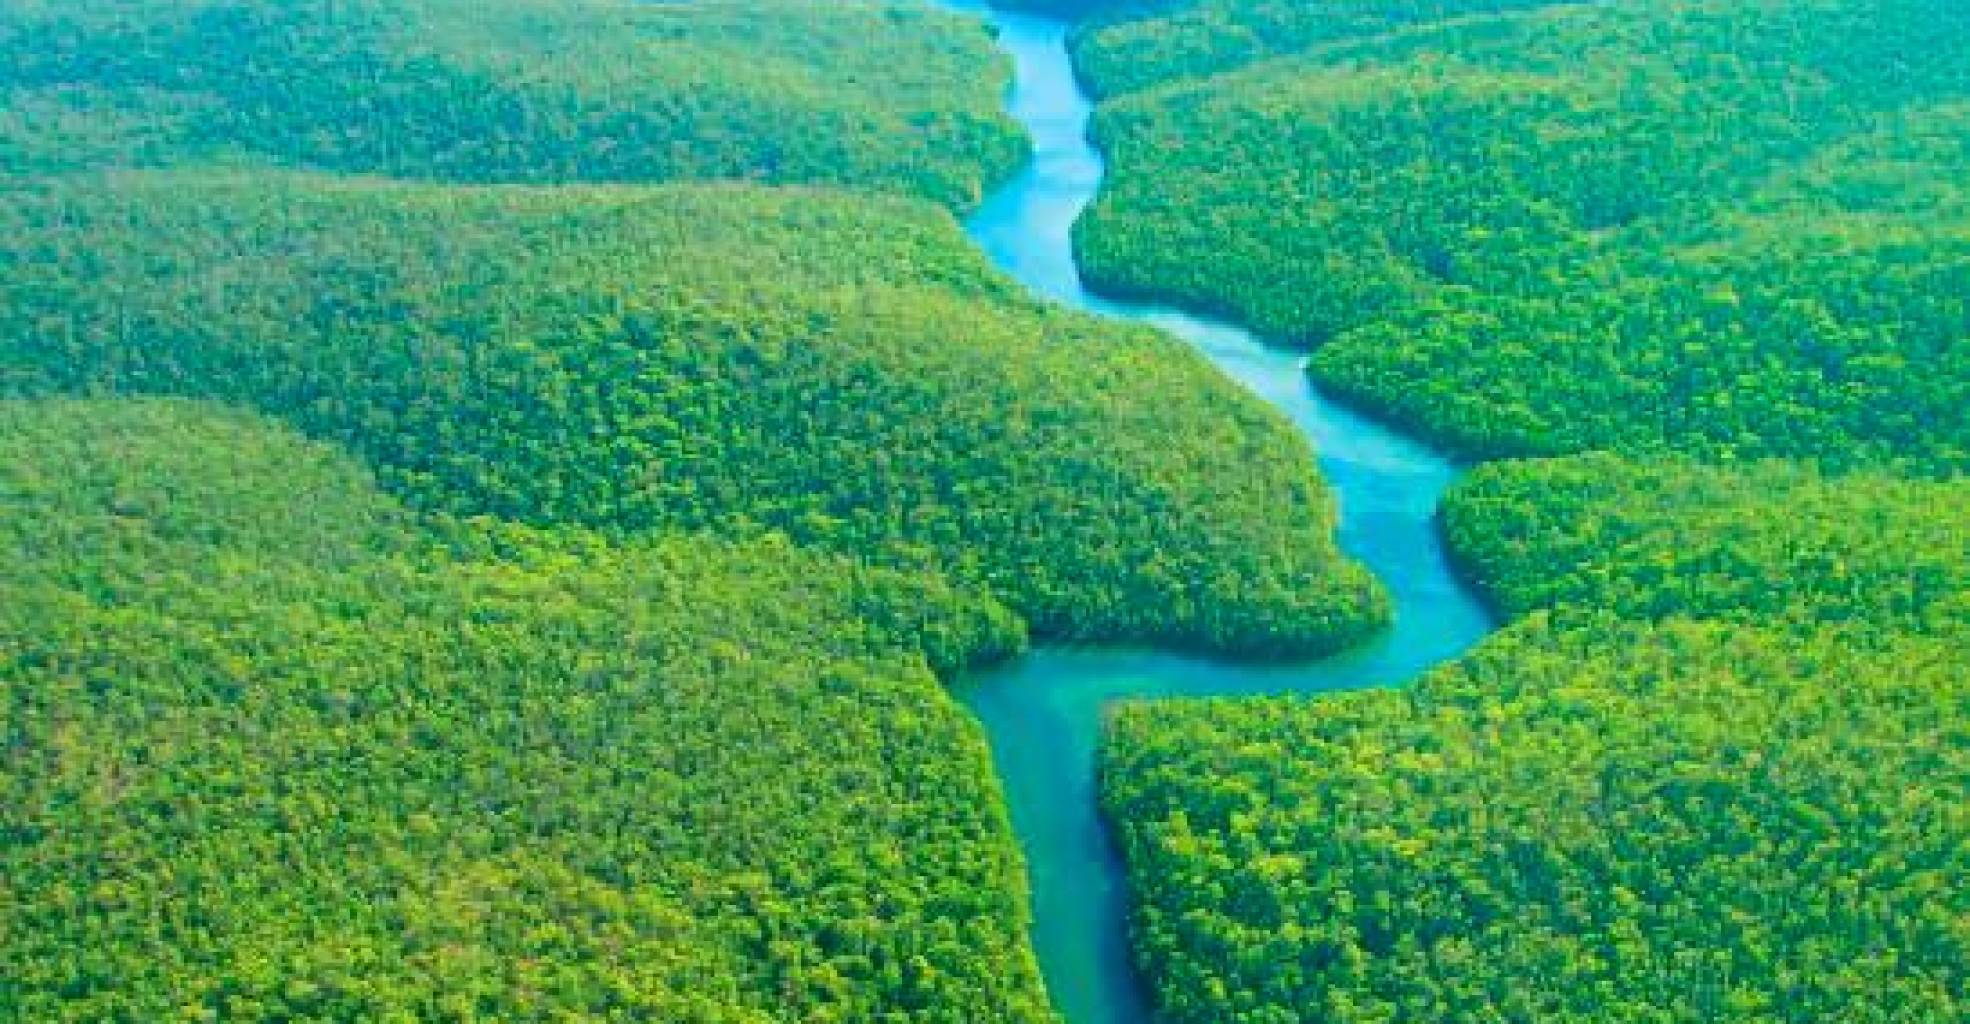 "We cannot live in a world without the Amazon," warns renowned Brazilian scientist